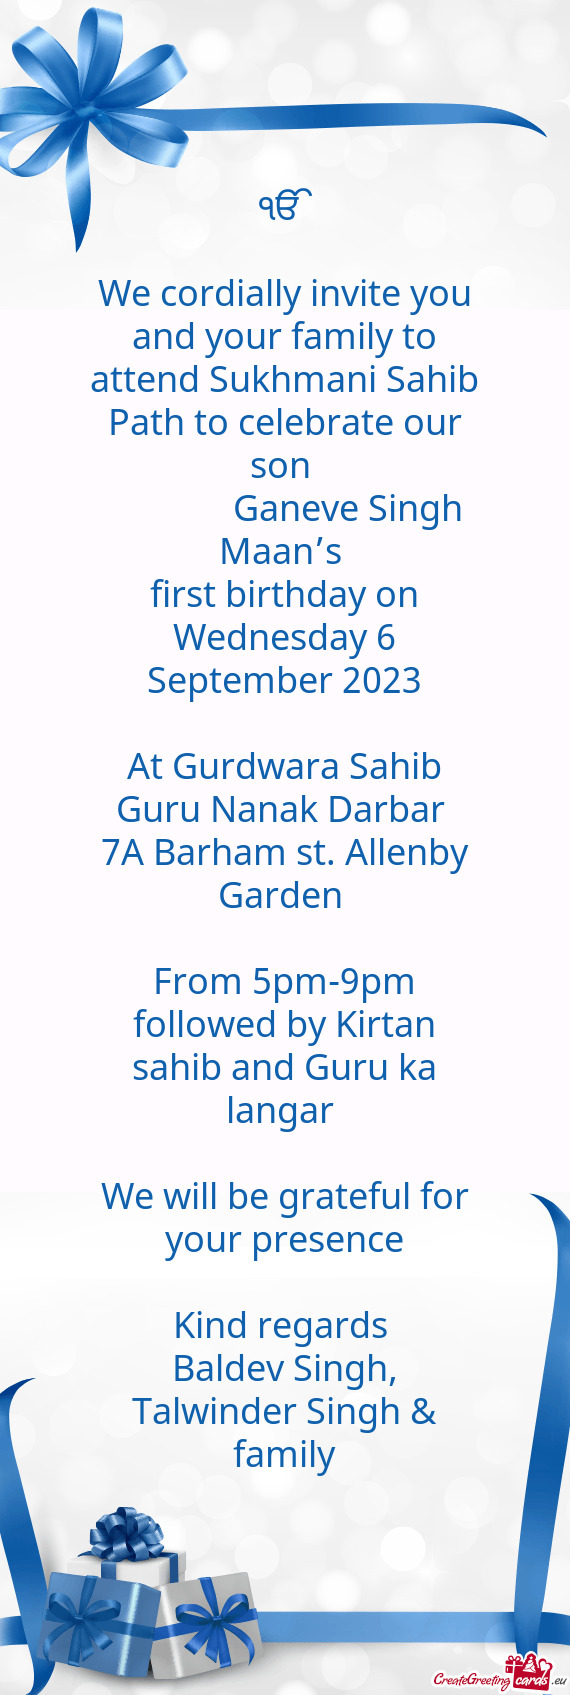 We cordially invite you and your family to attend Sukhmani Sahib Path to celebrate our son